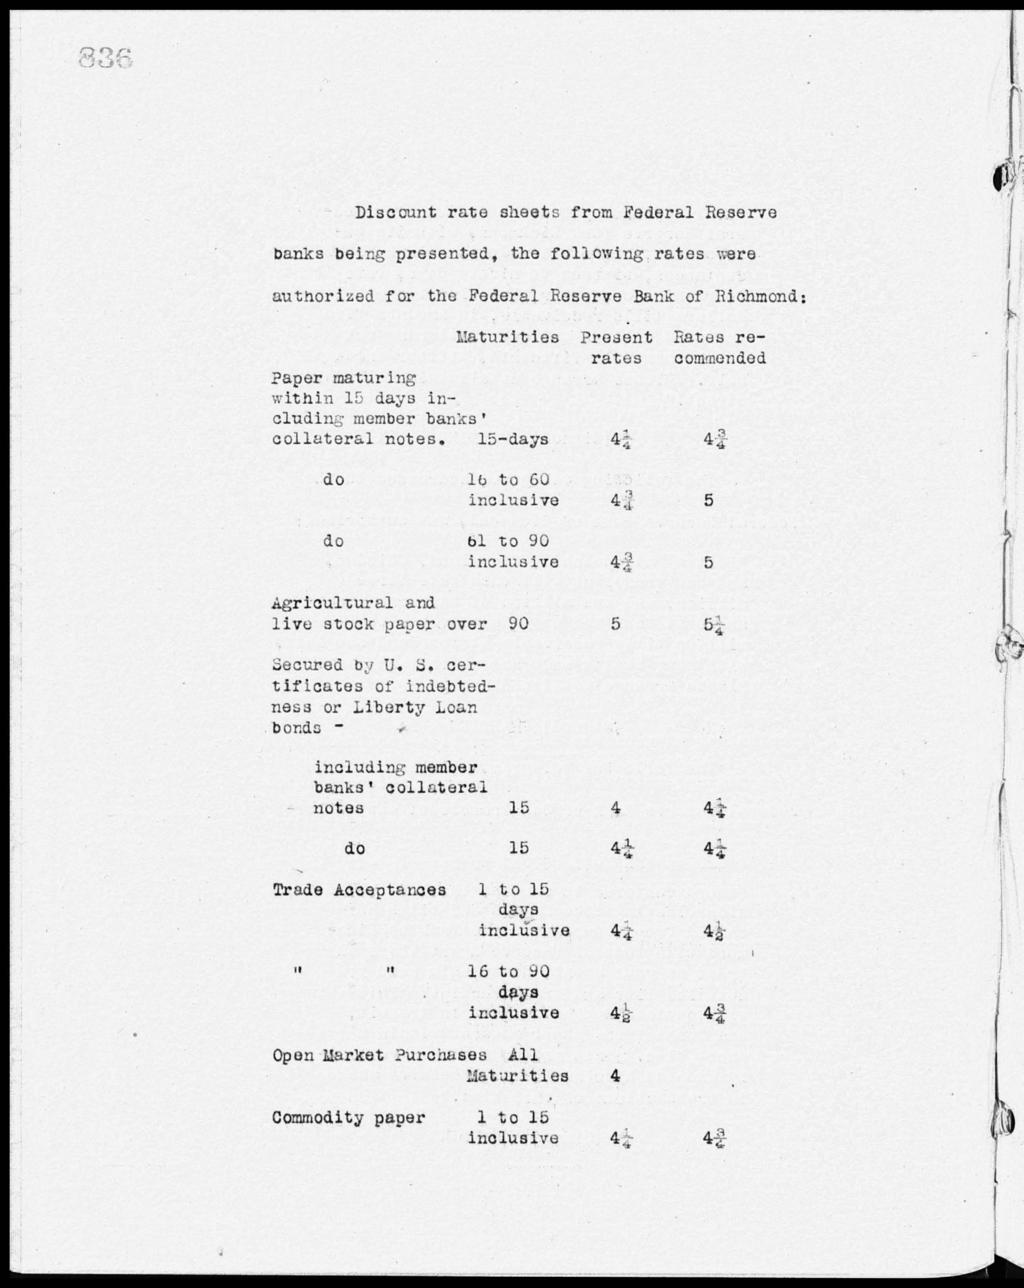 83 Discount rate sheets from Federal Reserve banks being presented, the following rates were authorized for the Federal Reserve Bank of Richmond: Maturities Present Rates rerates commended Paper